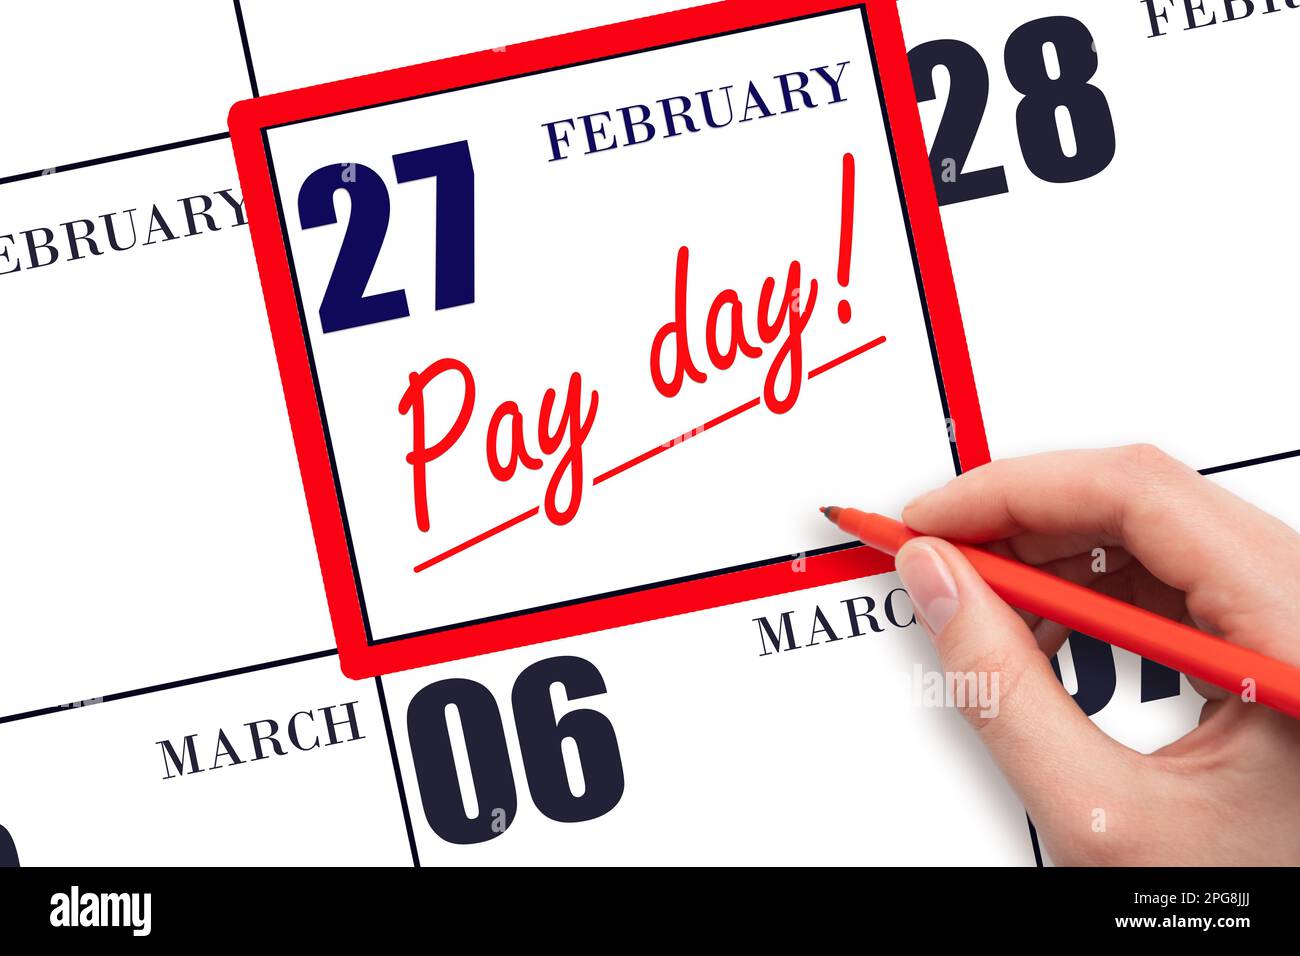 27th day of February. Hand writing text PAY DATE on calendar date February 27 and underline it. Payment due date. Reminder concept of payment. Winter Stock Photo